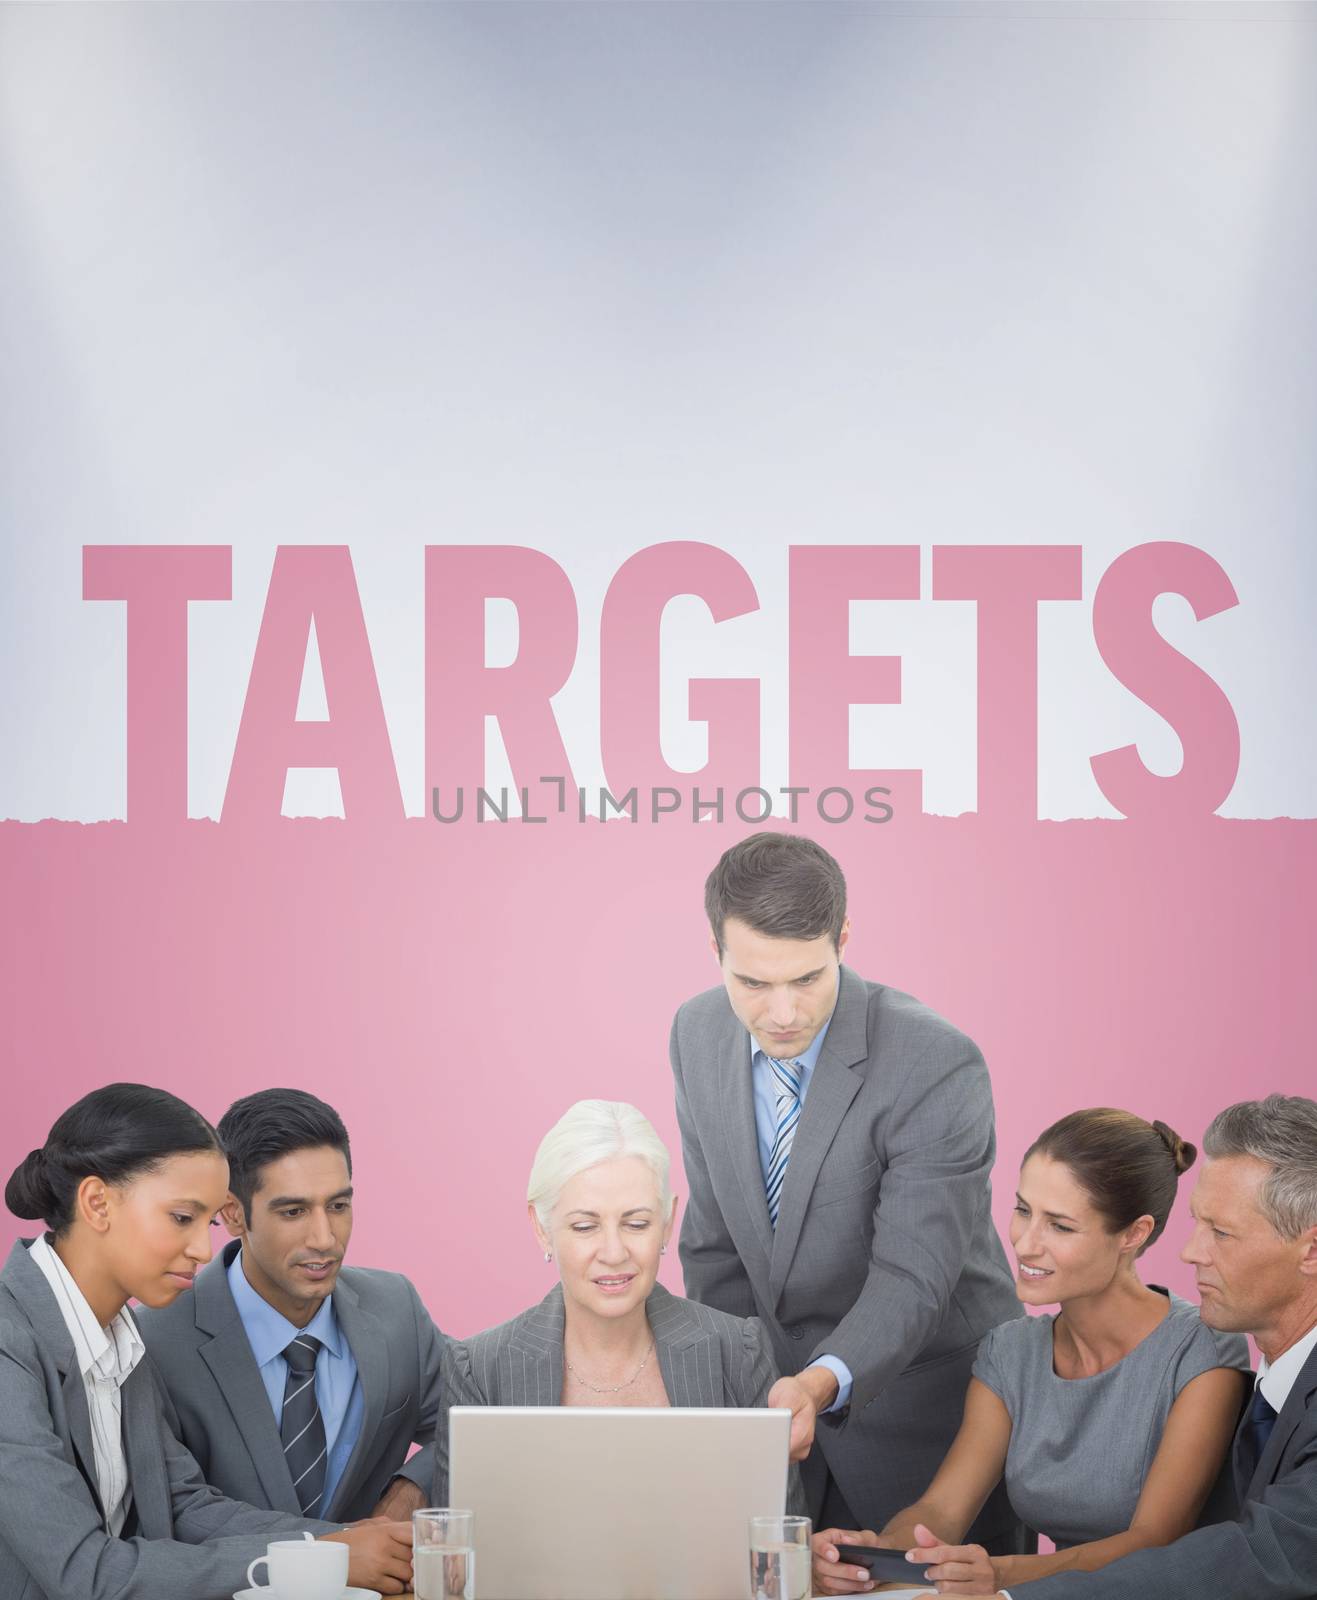 Business people using laptop  against targets